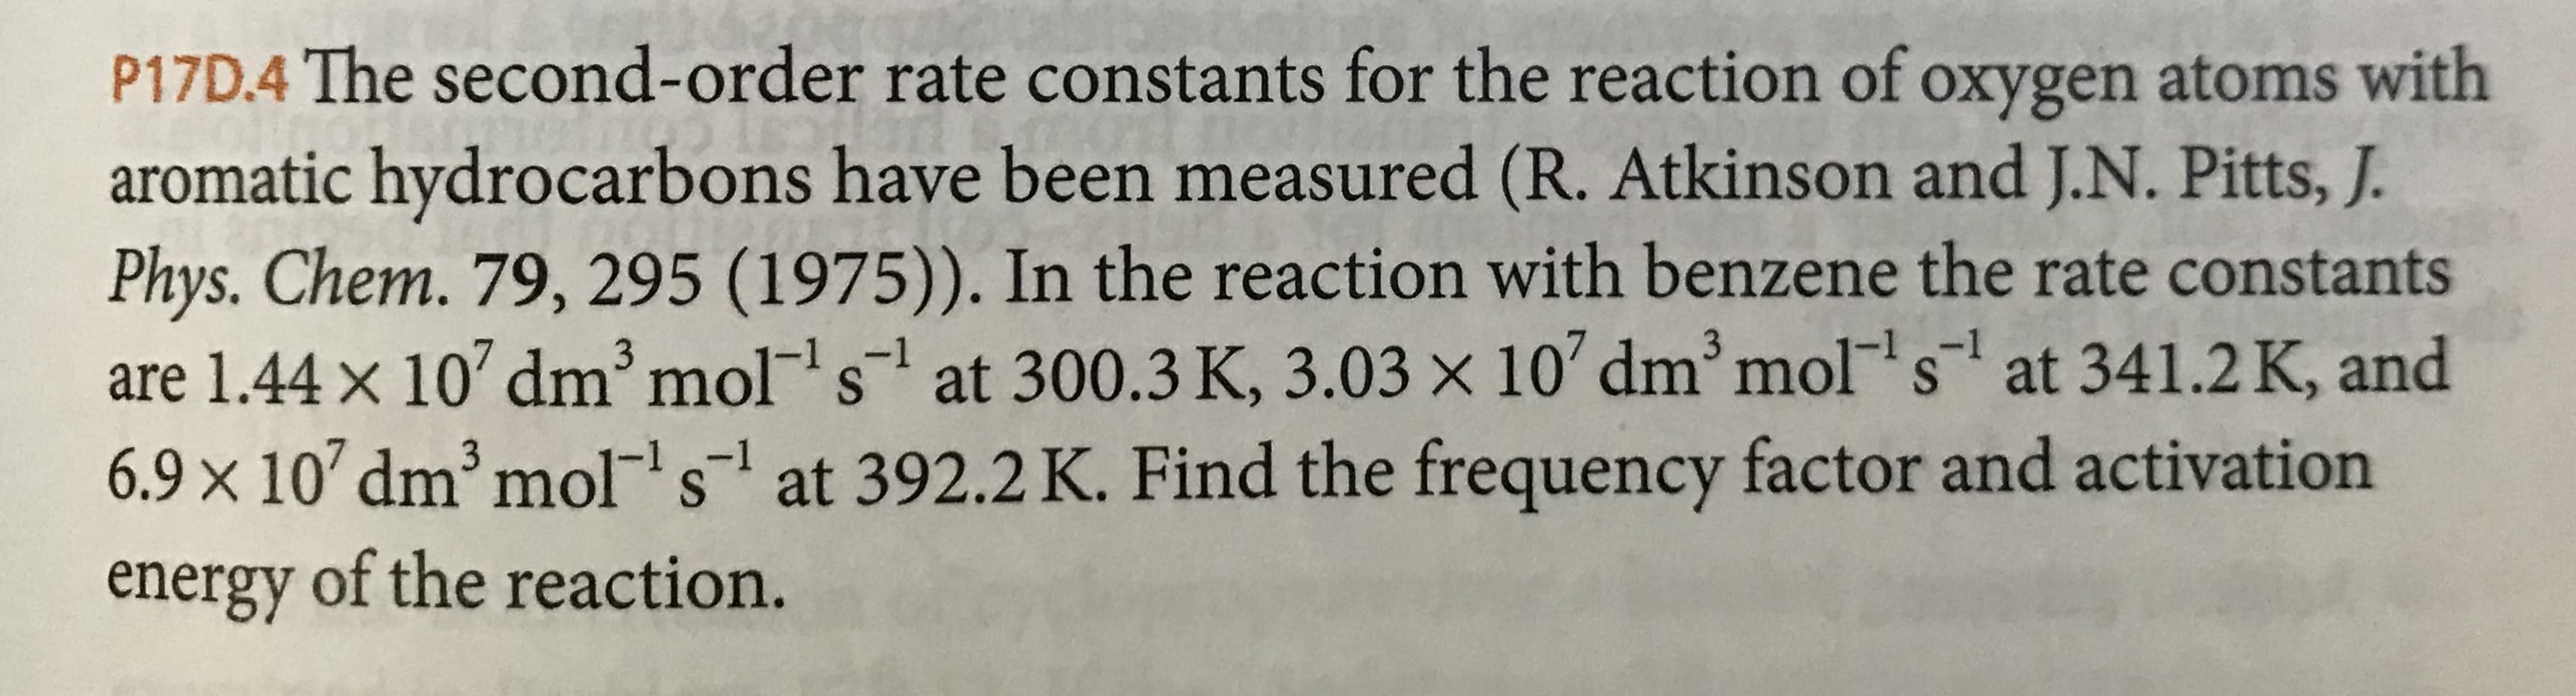 P17D.4 The second- order rate constants for the reaction of oxygen atoms with
aromatic hydrocarbons have been measured (R. Atkinson and J.N. Pitts, J.
Phys. Chem. 79, 295 (1975)). In the reaction with benzene the rate constants
are 1.44 x 10 dm3 mol s at 300.3 K, 3.03 x 10 dm mol s at 341.2 K, and
6.9 x 10 dm3 mols at 392.2K. Find the frequency factor and activation
energy of the reaction.
